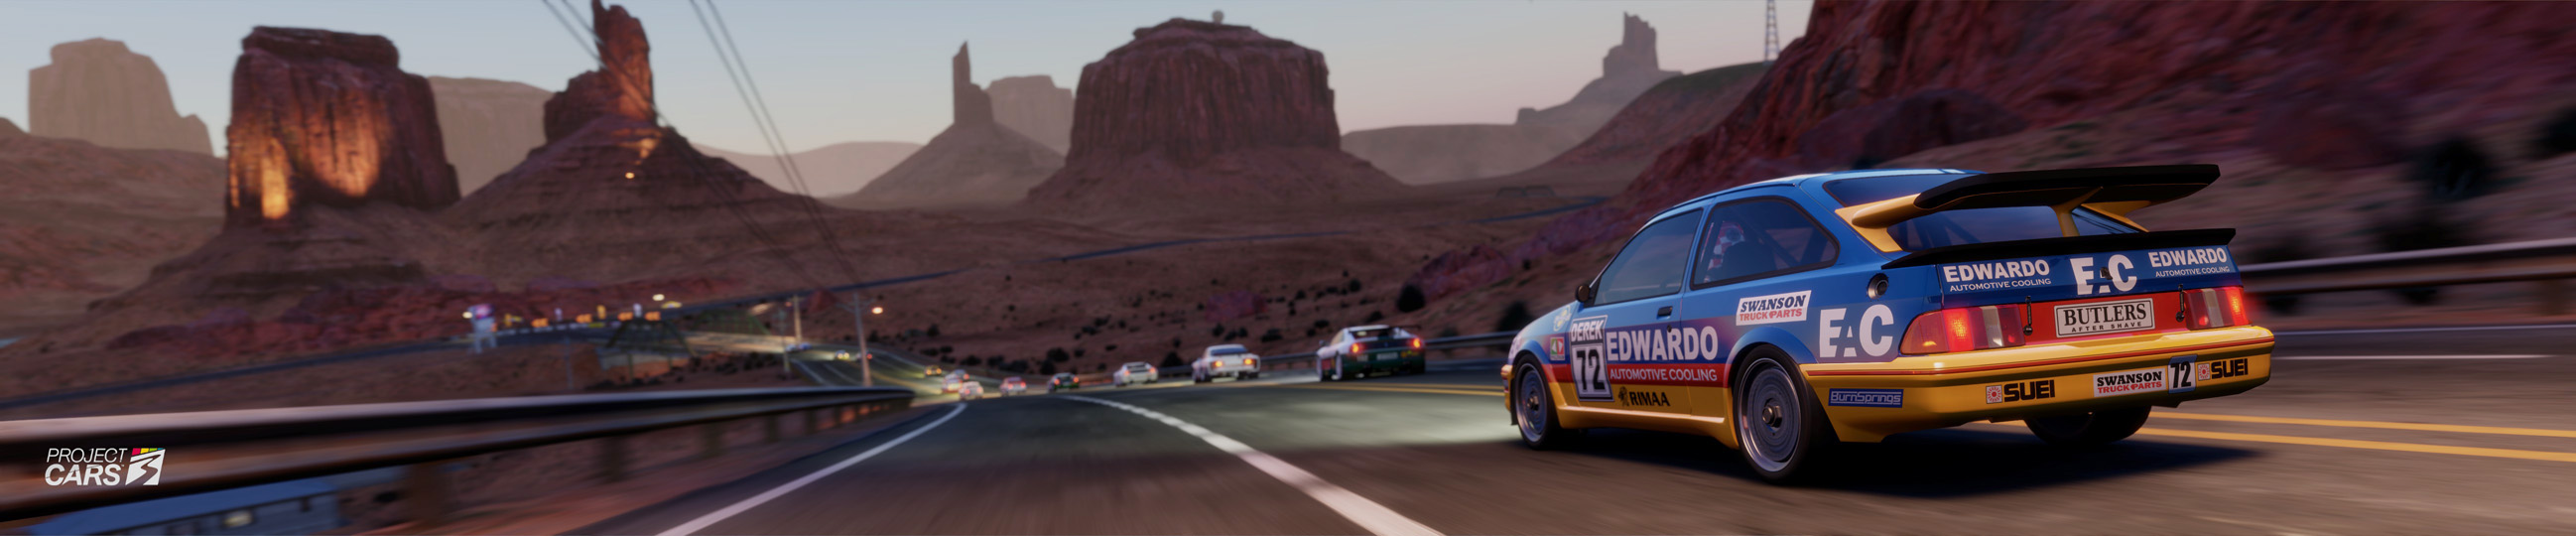 0 PROJECT CARS 3 COSWORTH at MONUMENT CANYON crop copy.jpg